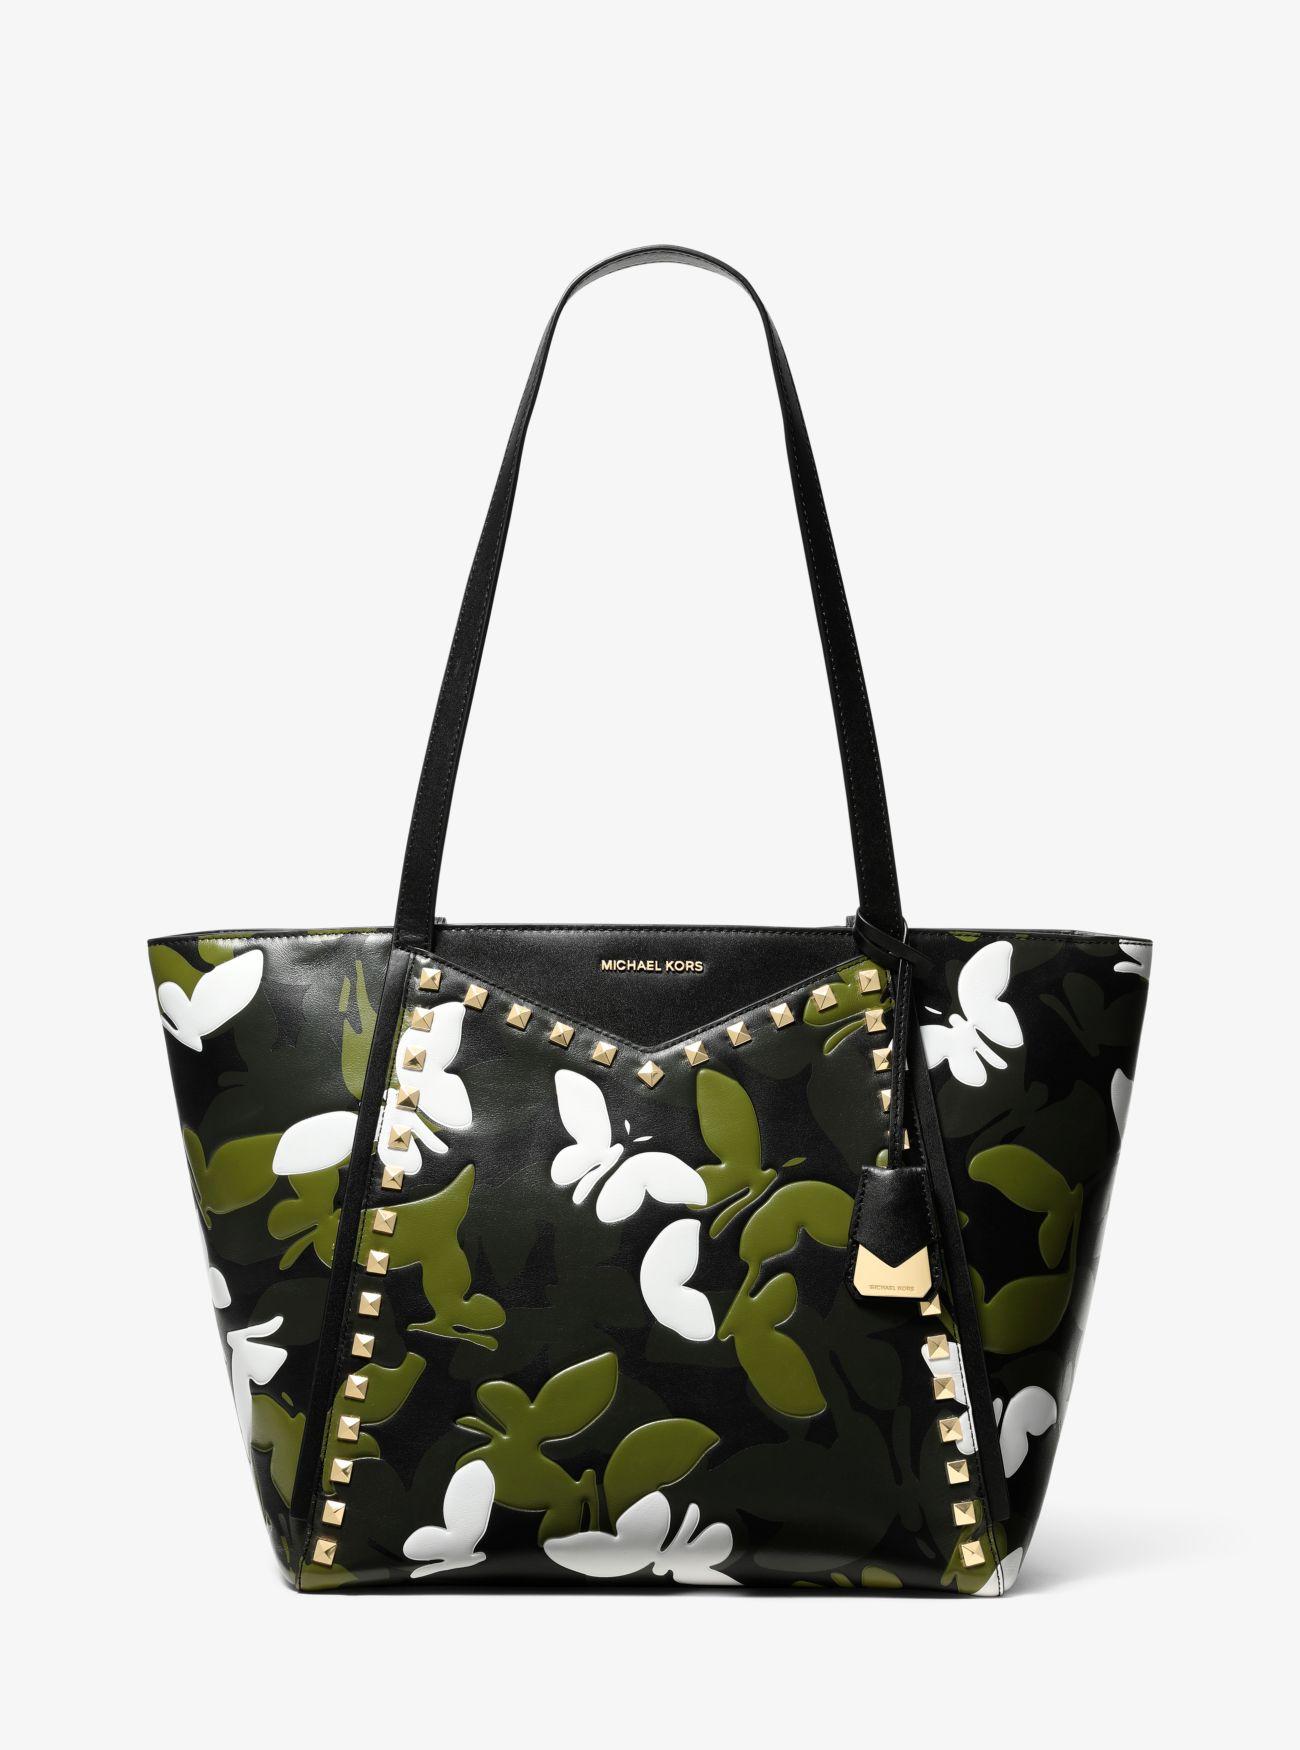 Michael Kors Whitney Large Butterfly Camo Leather Tote Bag in Black | Lyst